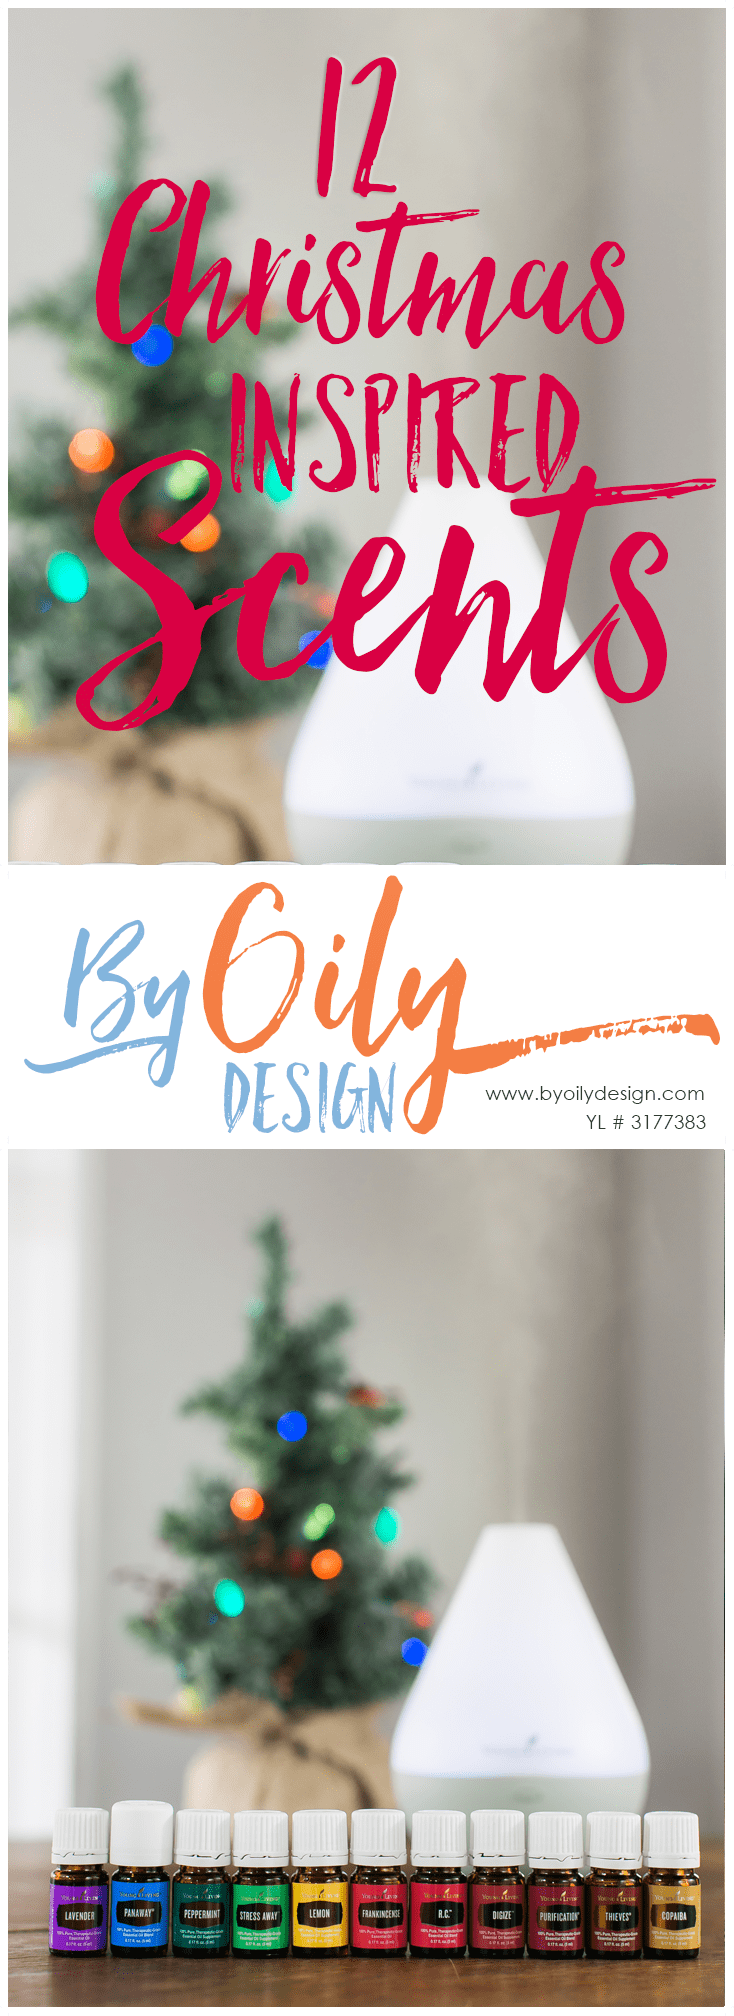 12 Essential Oil Diffuser recipes for Christmas. Christmas Diffuser recipes. Get in the Christmas Spirit by Diffusing Christmas Inspired Diffuser recipes.